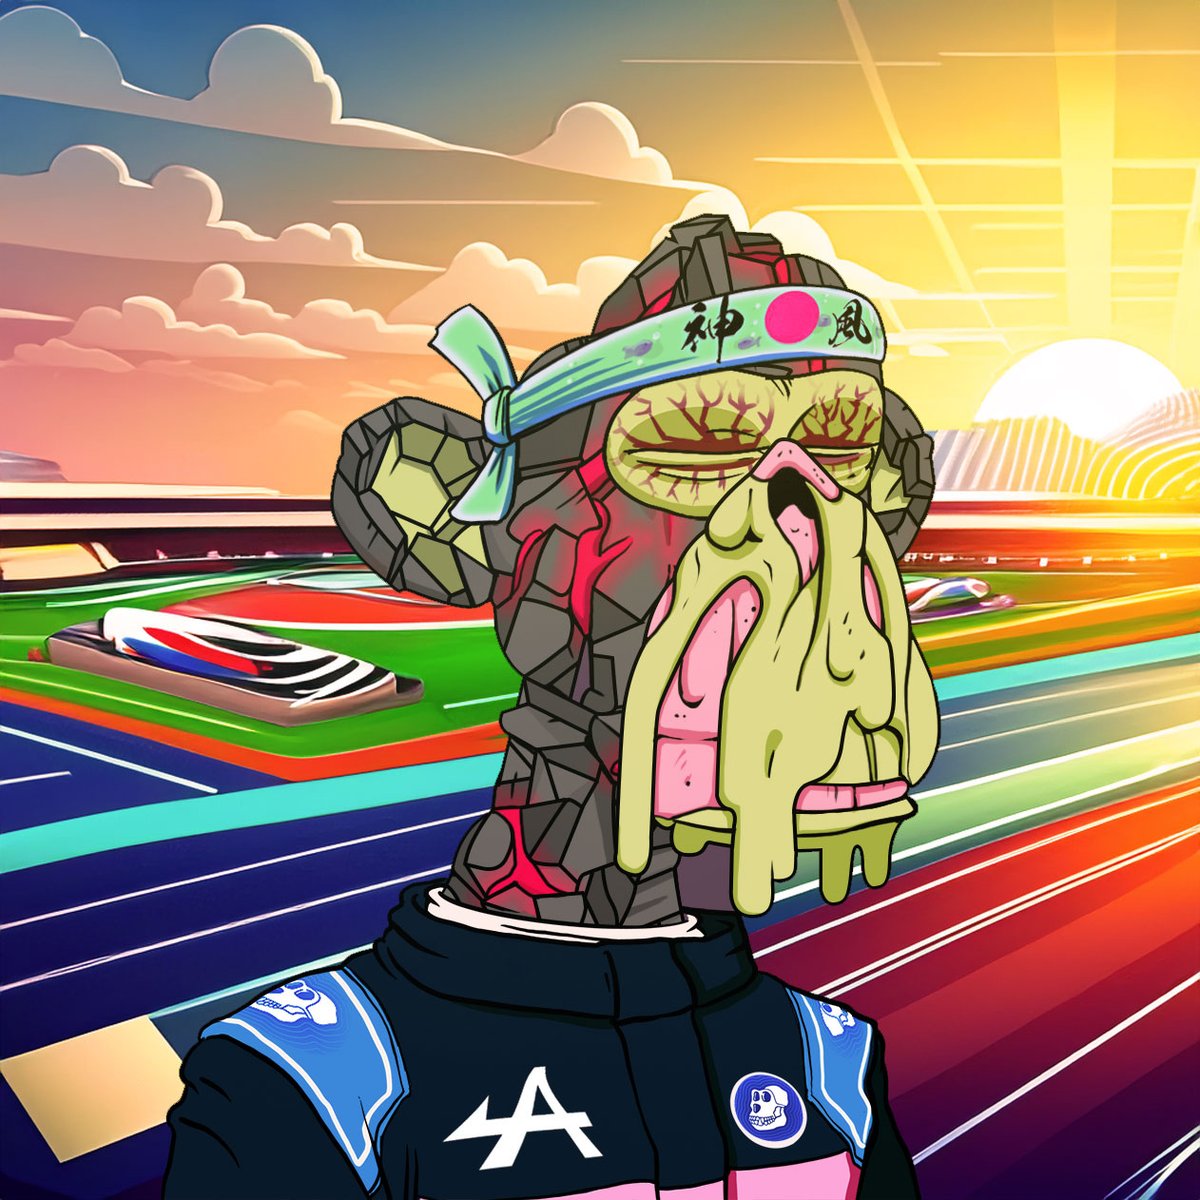 🏎️🏁🏎️🏁🏎️🏁
The famous Japanese ape sushi chef is dressed to impress and support the @AlpineF1Team during the Miami Grand Prix 2024!

Let me see your ape in a @ApeCoin racing suit! 
#BAYC
#MAYC